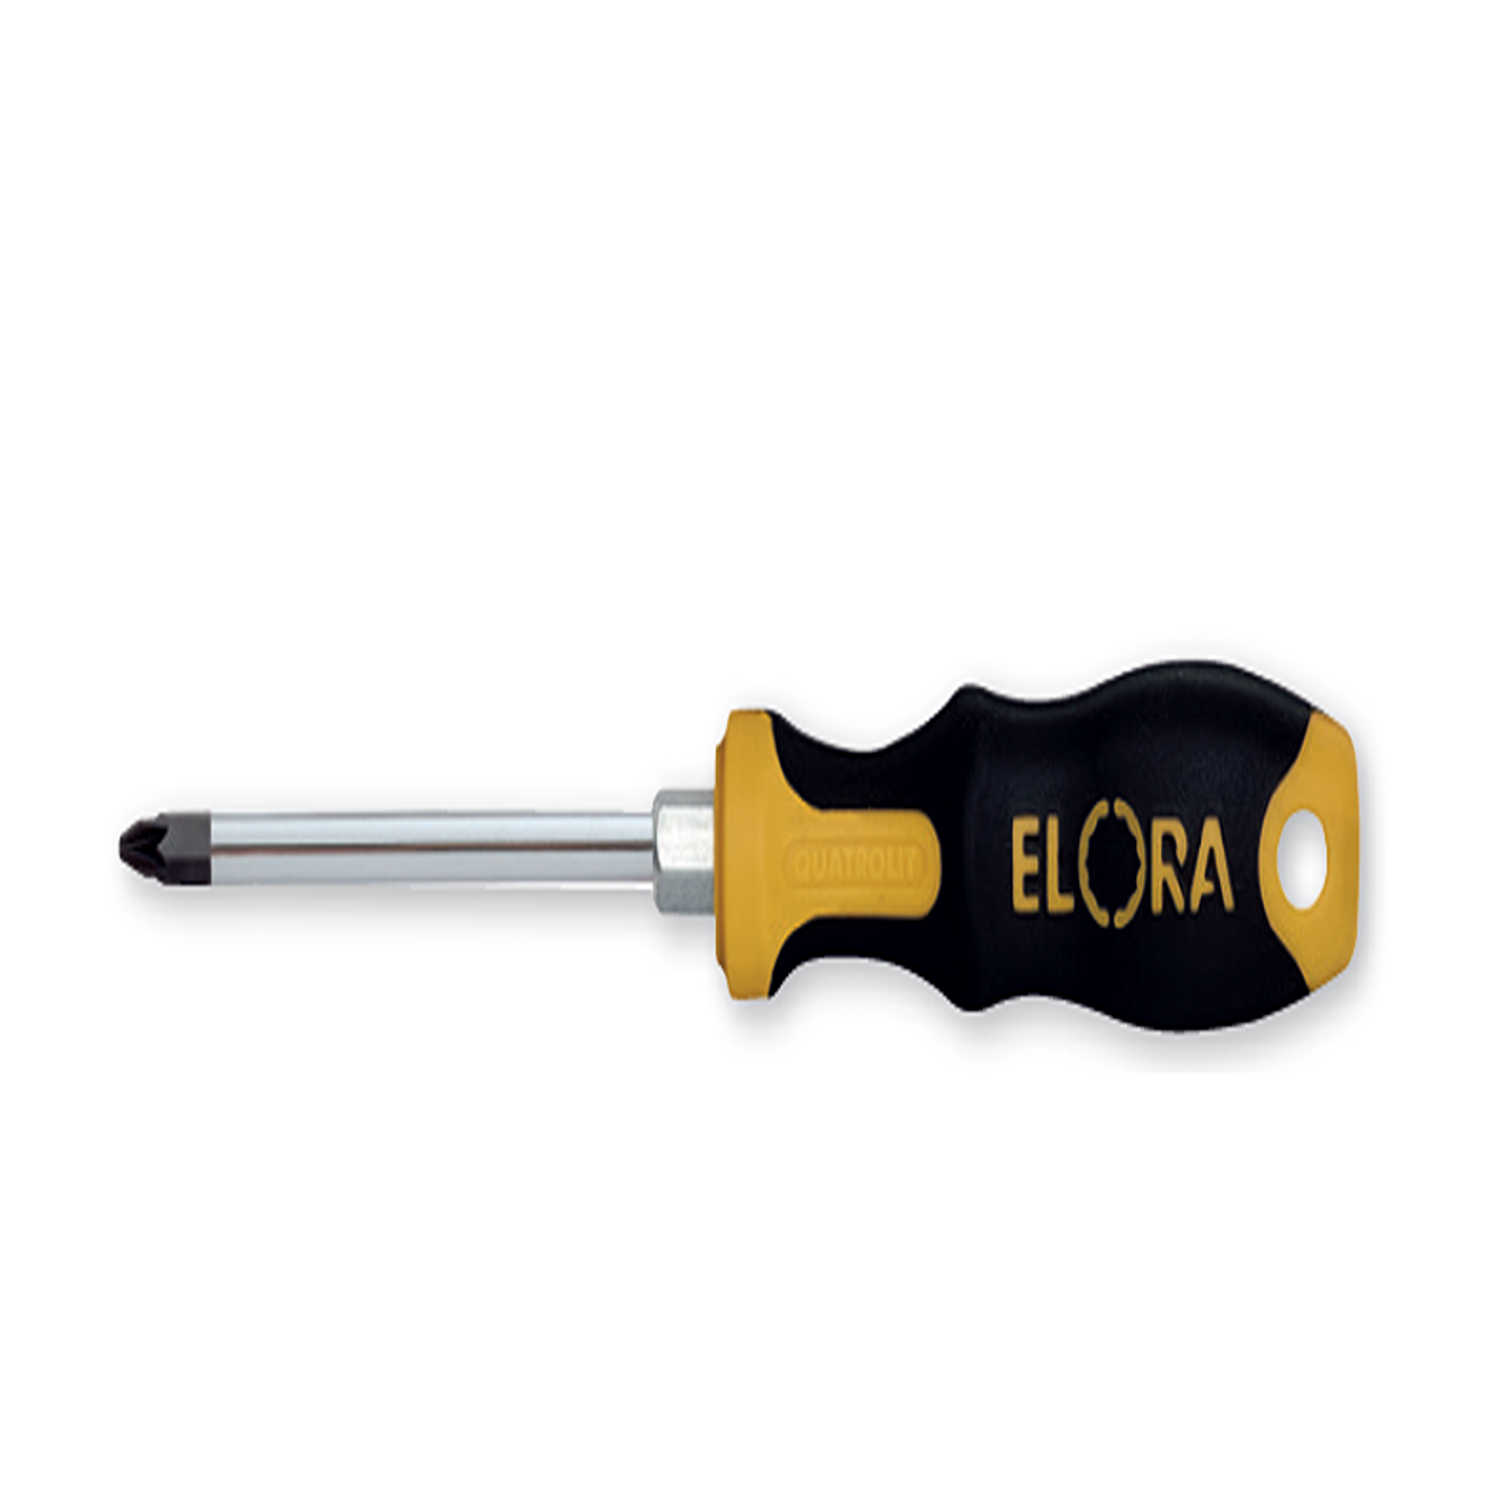 ELORA 569-PZ Screwdriver for Cross Slotted Screws (ELORA Tools) - Premium Screwdriver from ELORA - Shop now at Yew Aik.